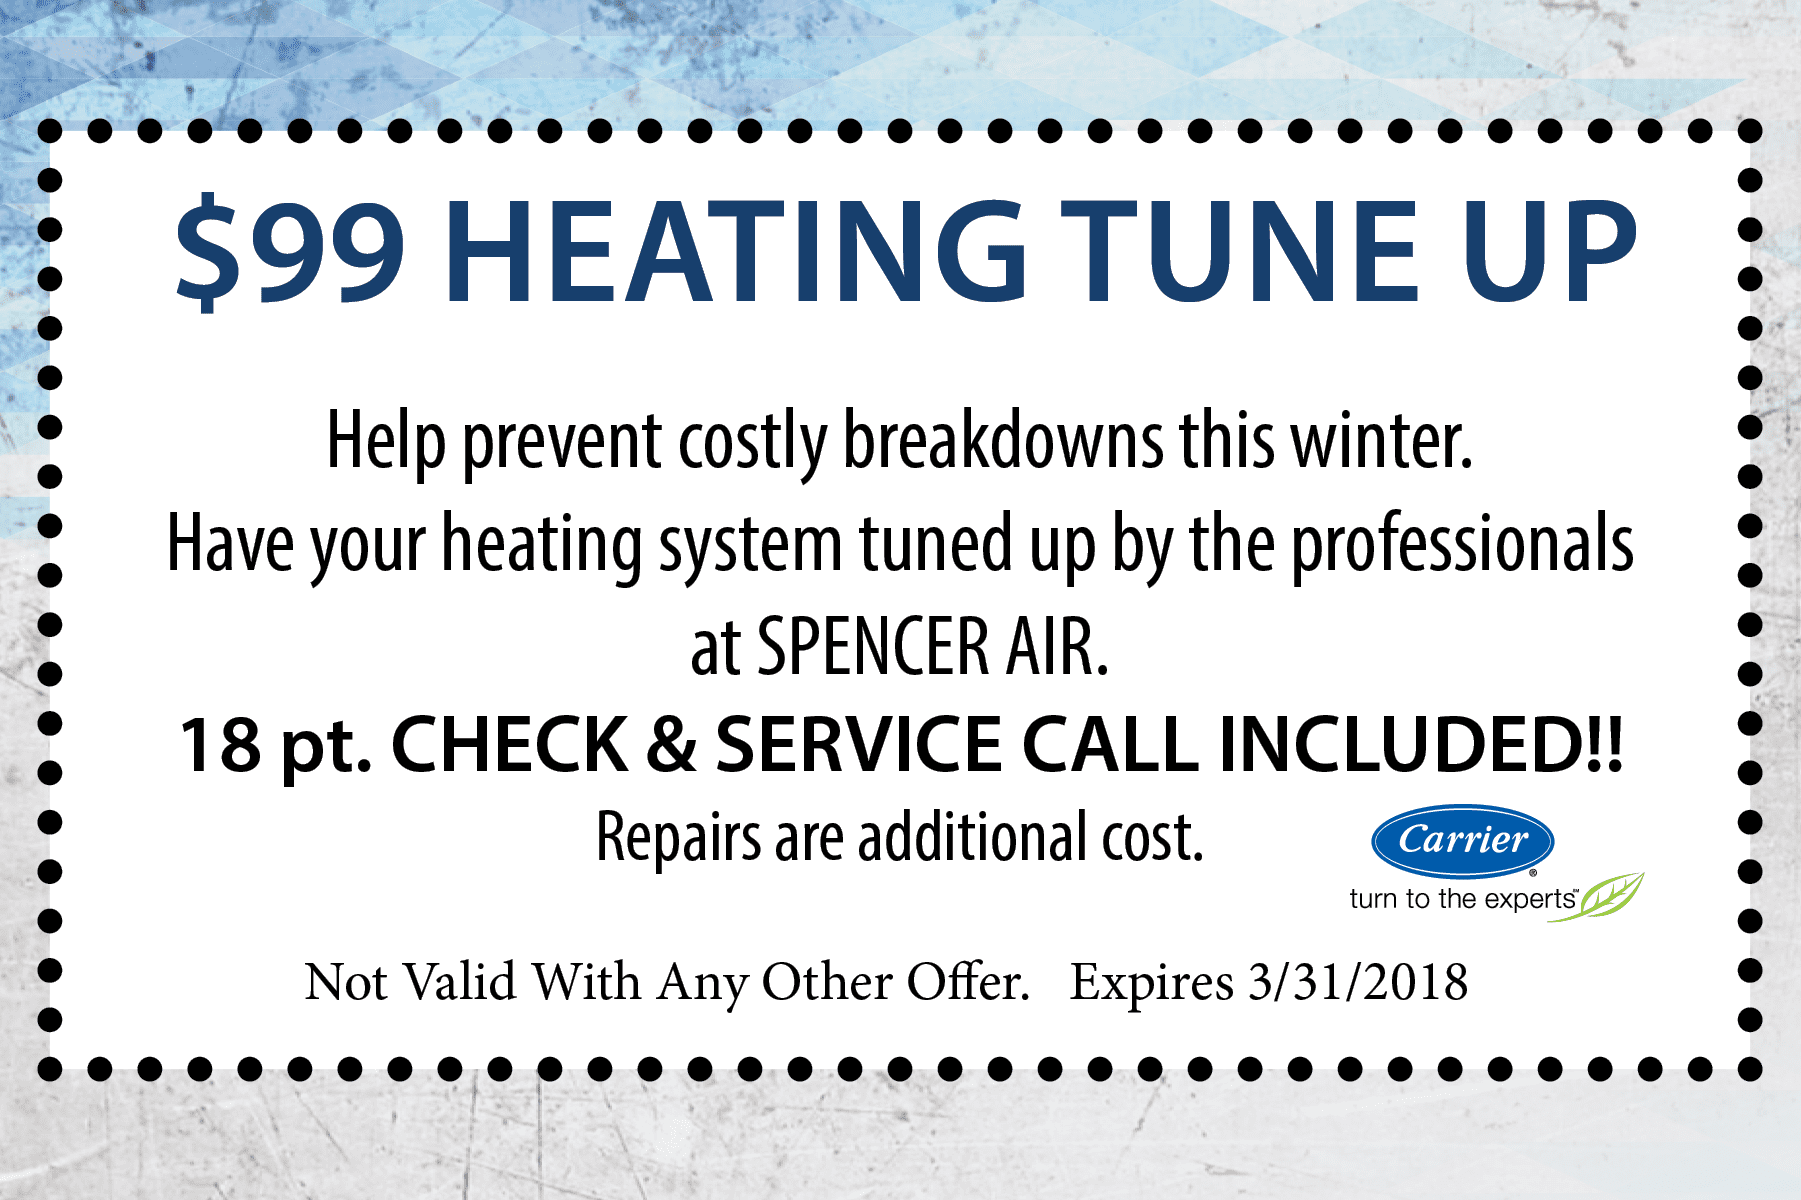 $99 heating tune-up 18 point check and service call included offer